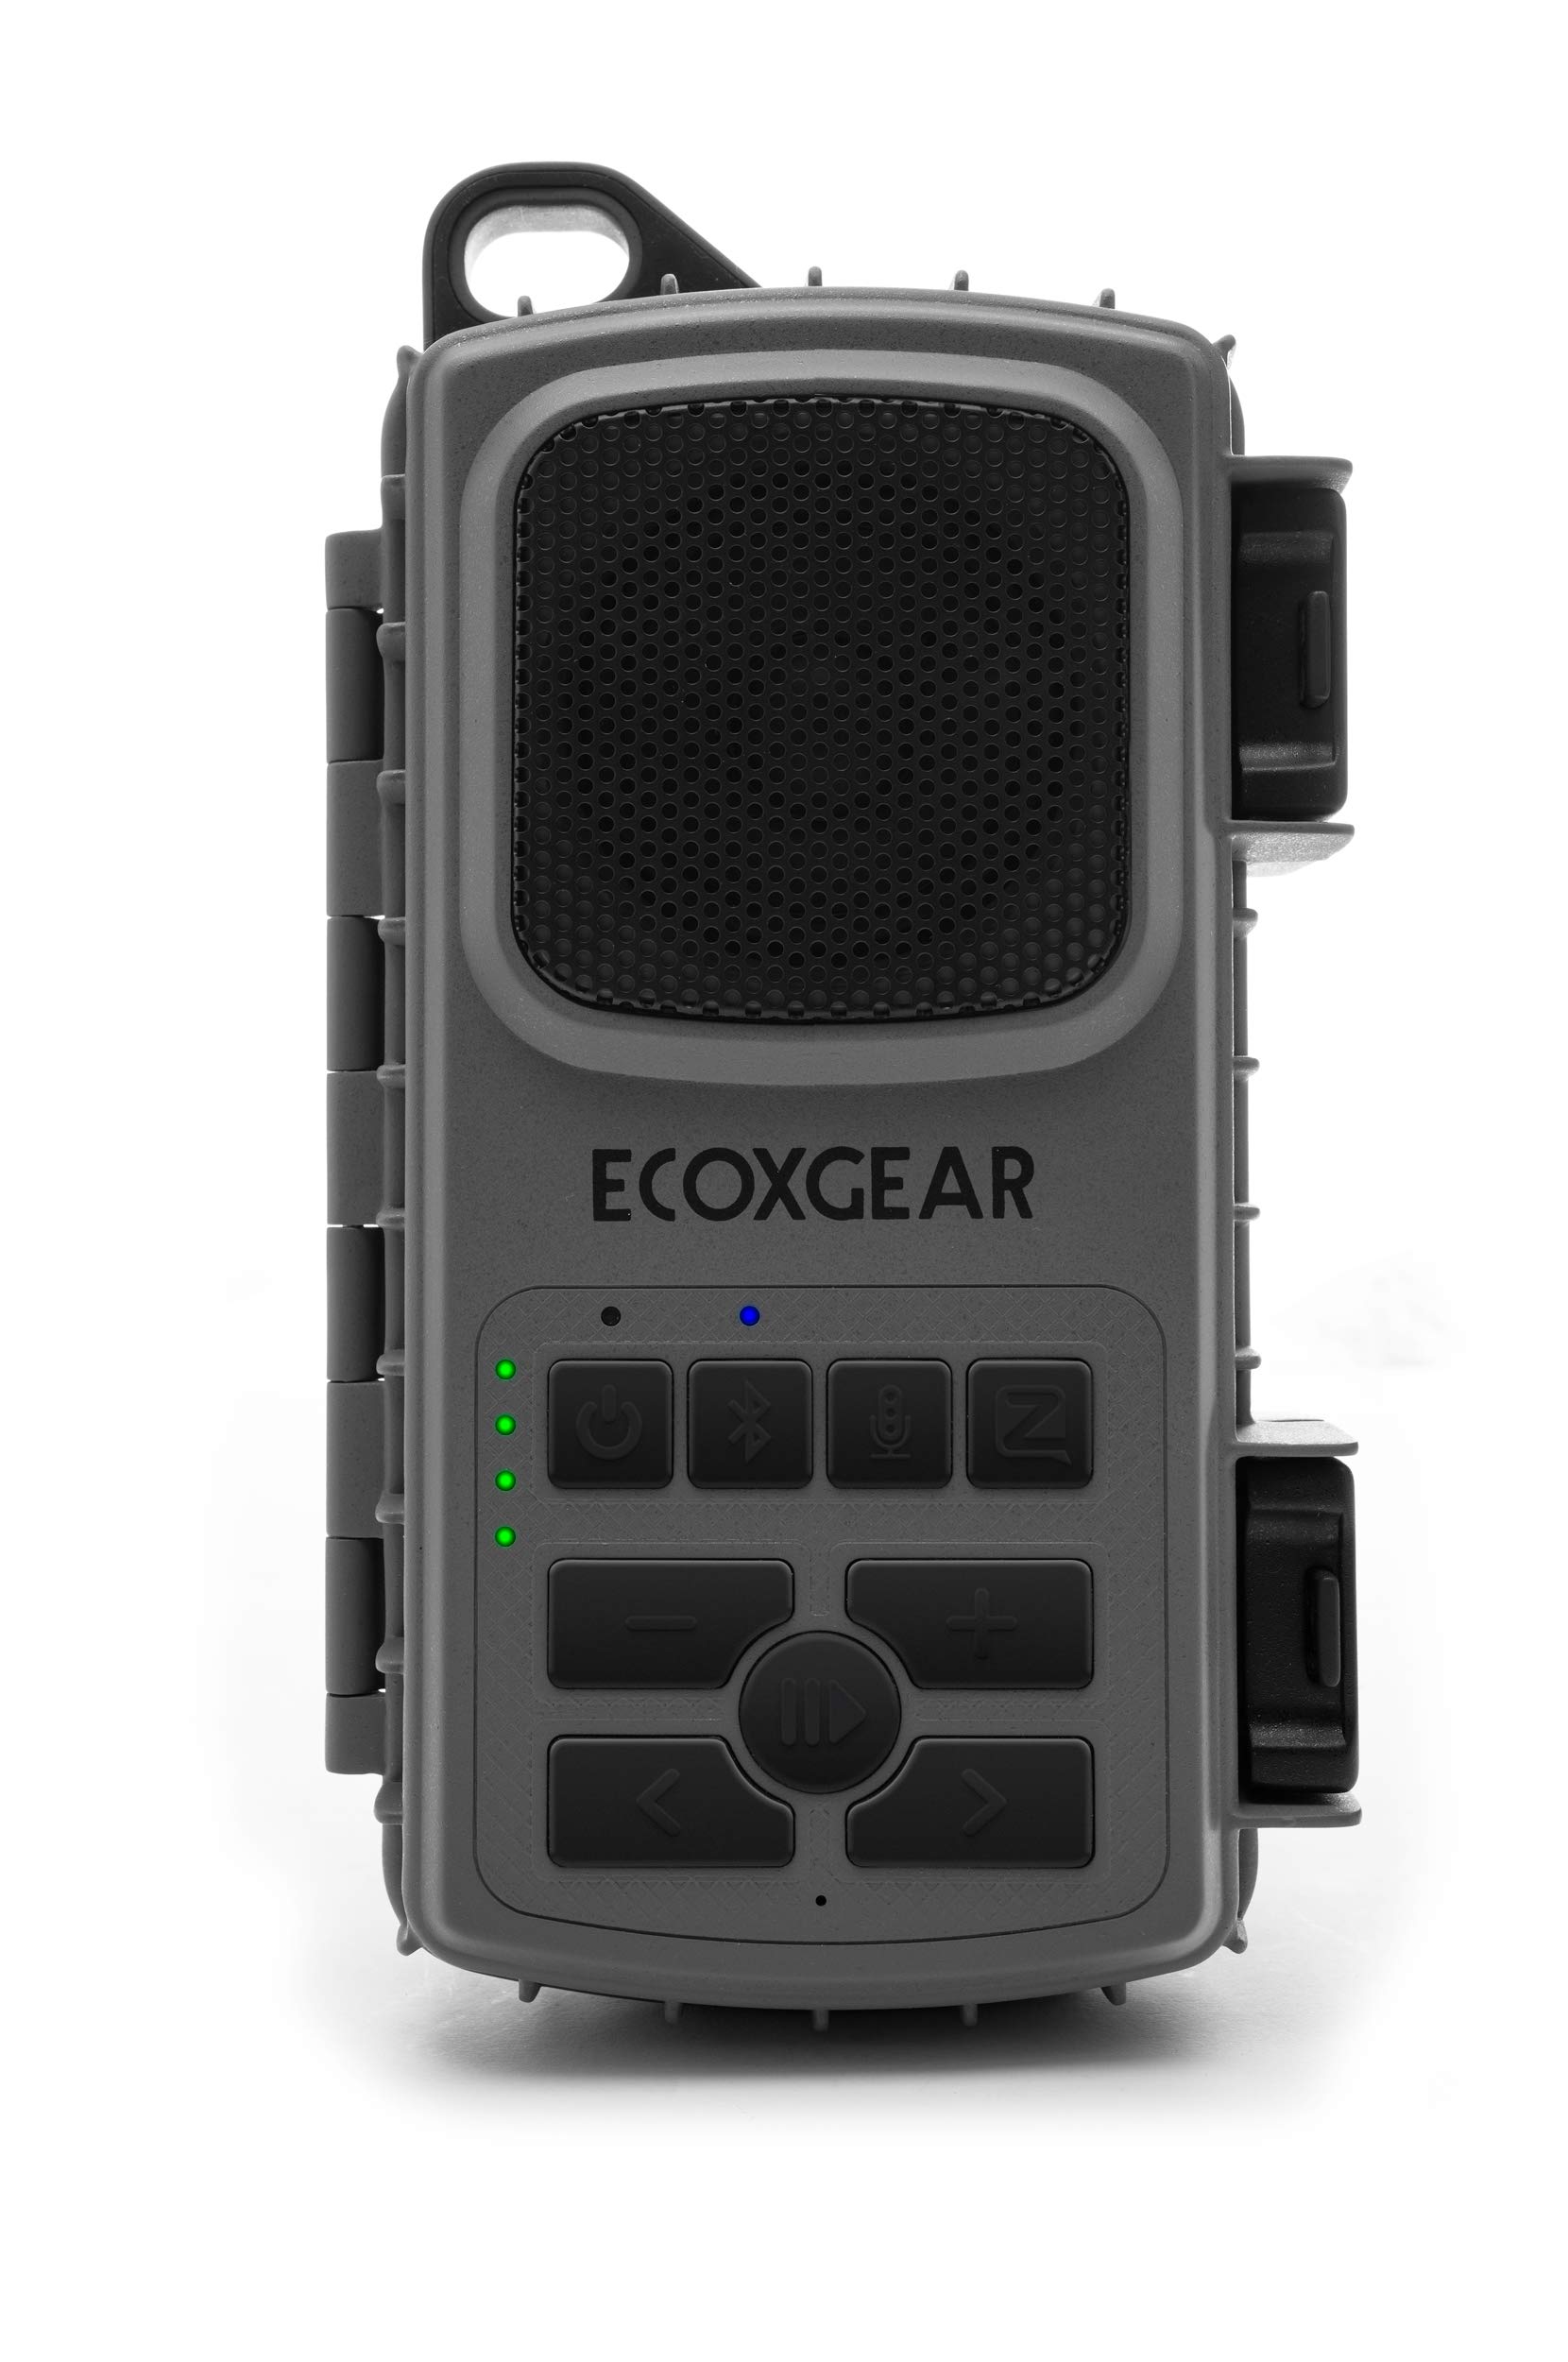 ECOXGEAR Floating Bluetooth Speaker with Waterproof Dry Storage for Your Smartphone: EcoExtreme 2 (Gray)